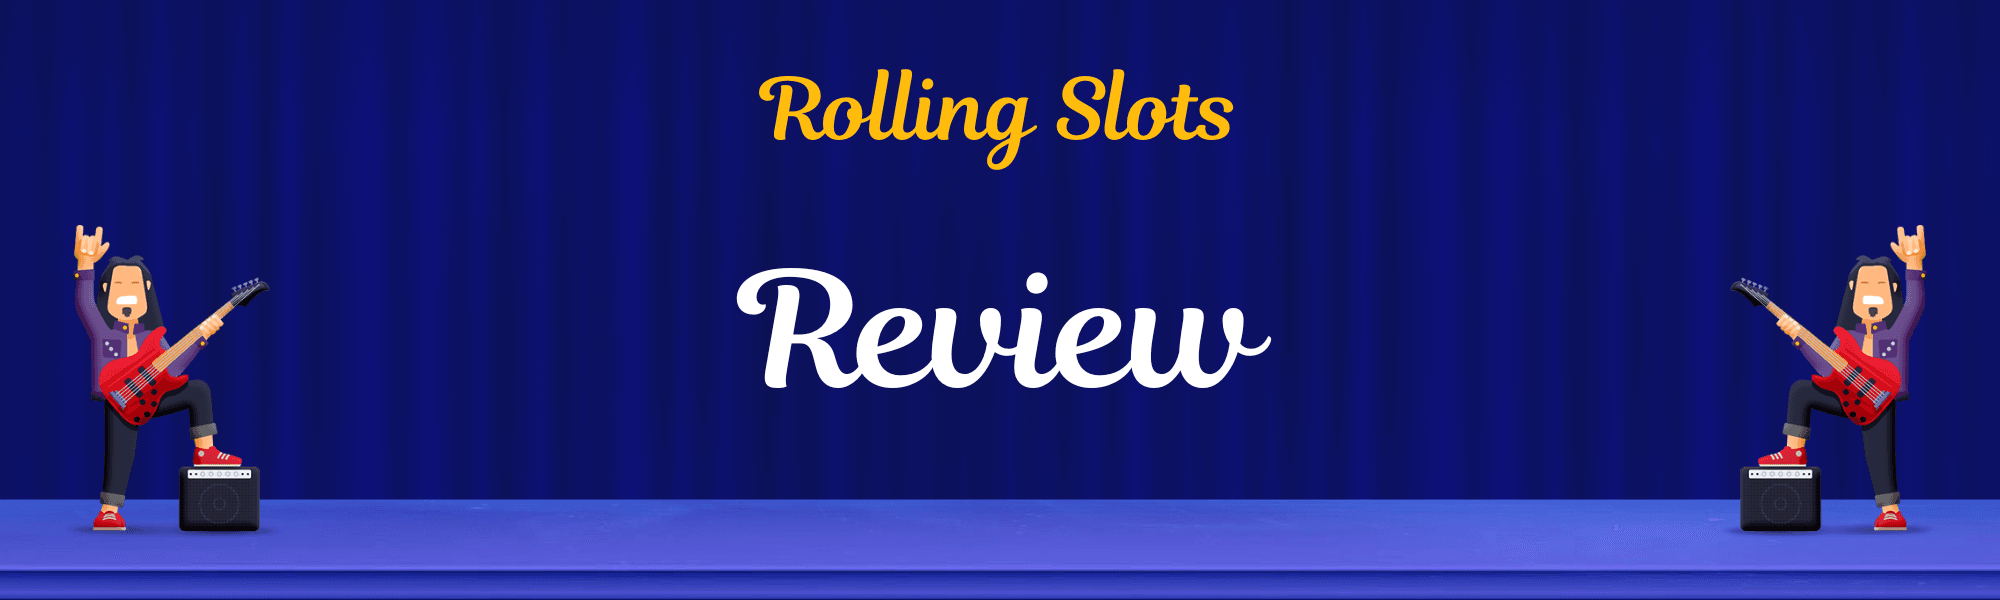 Rolling Slots Review.png